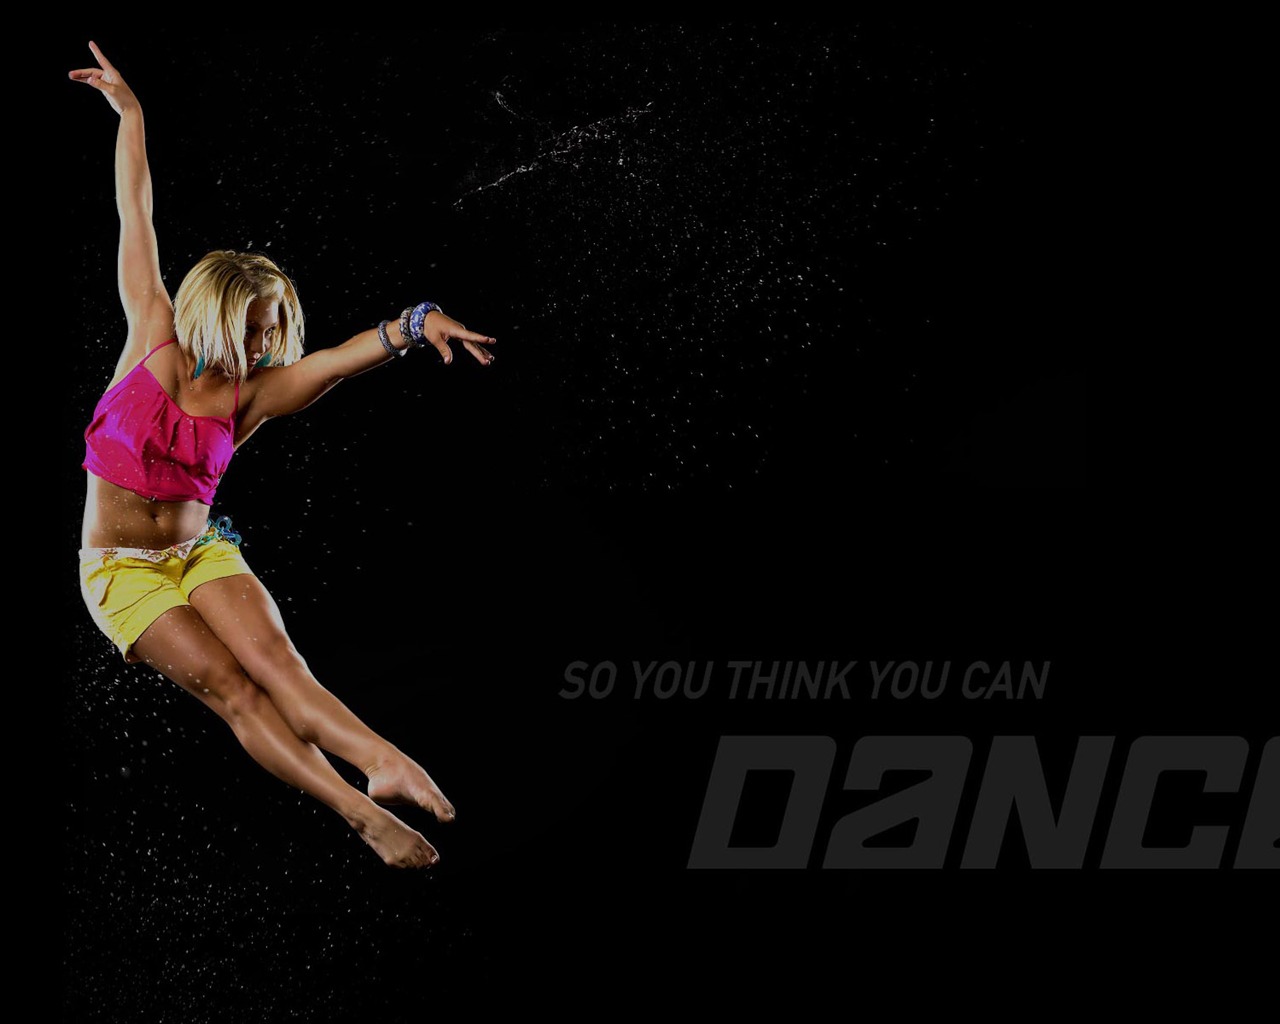 So You Think You Can Dance wallpaper (1) #5 - 1280x1024